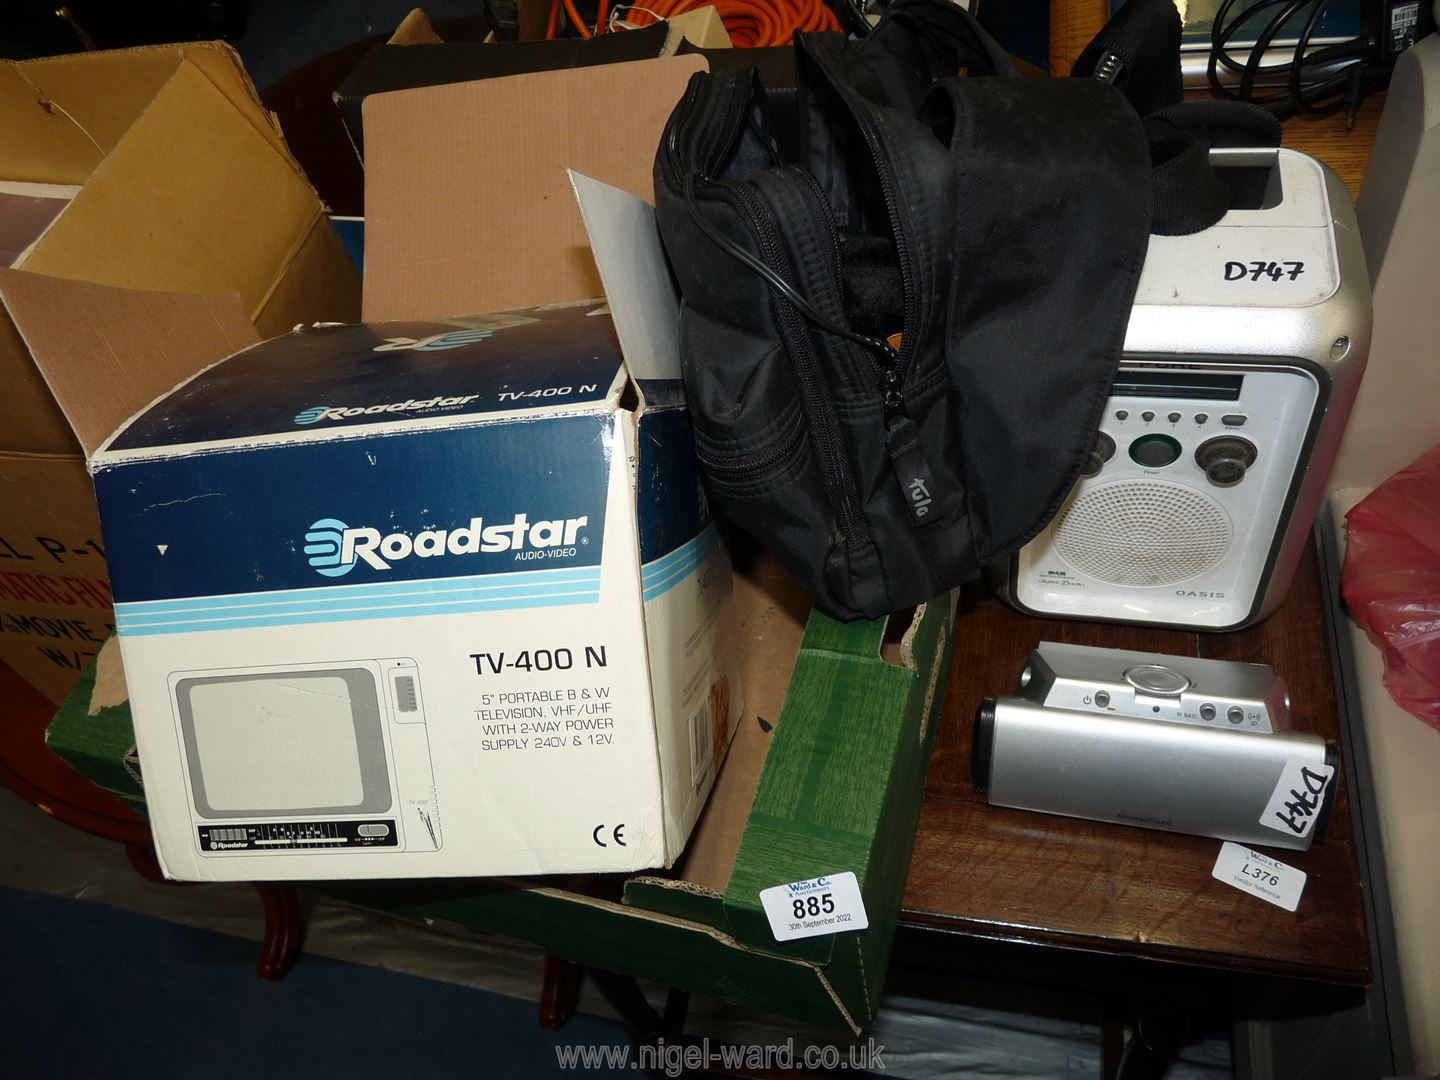 A 'Roadstar' portable TV, 'Pure' digital radio and 'Ministry of Sound' speaker.